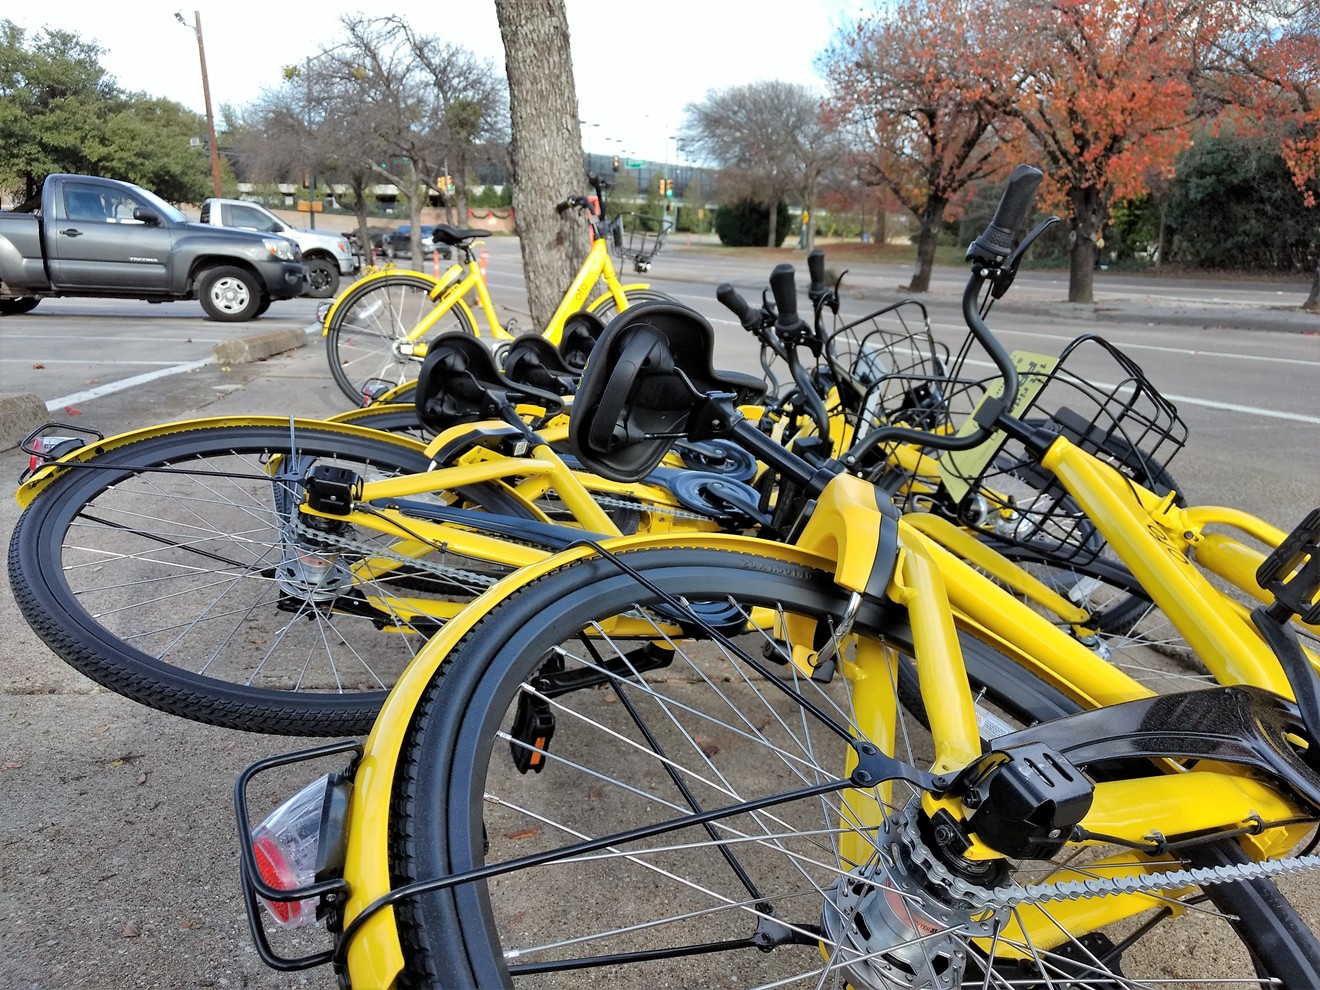 A pile of ofo bikes.